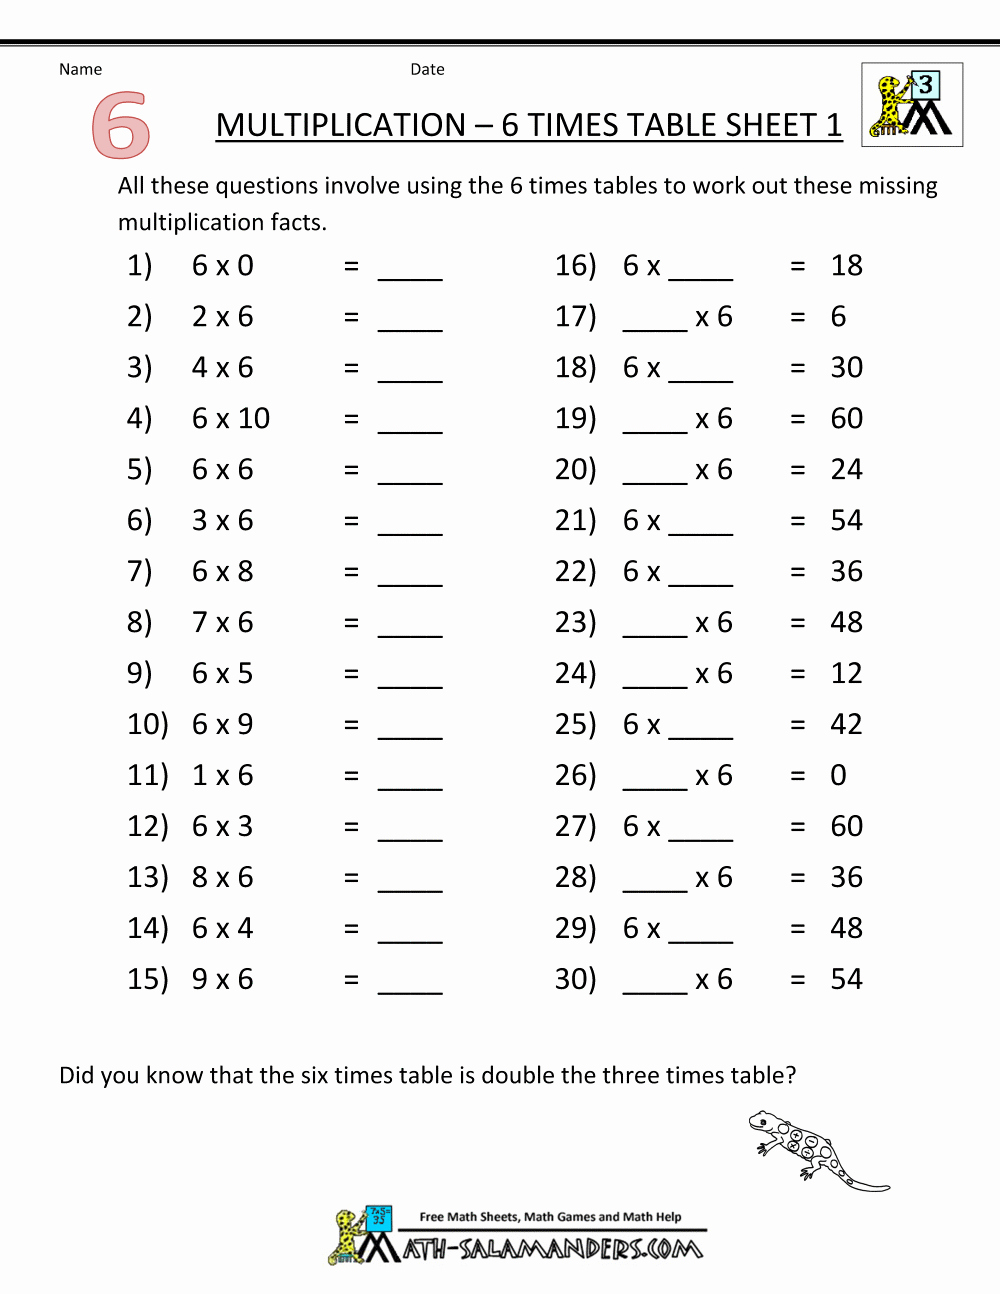 6 Times Table Worksheet Best Of Math Worksheets Printable Multiplication 6 Times Table 1